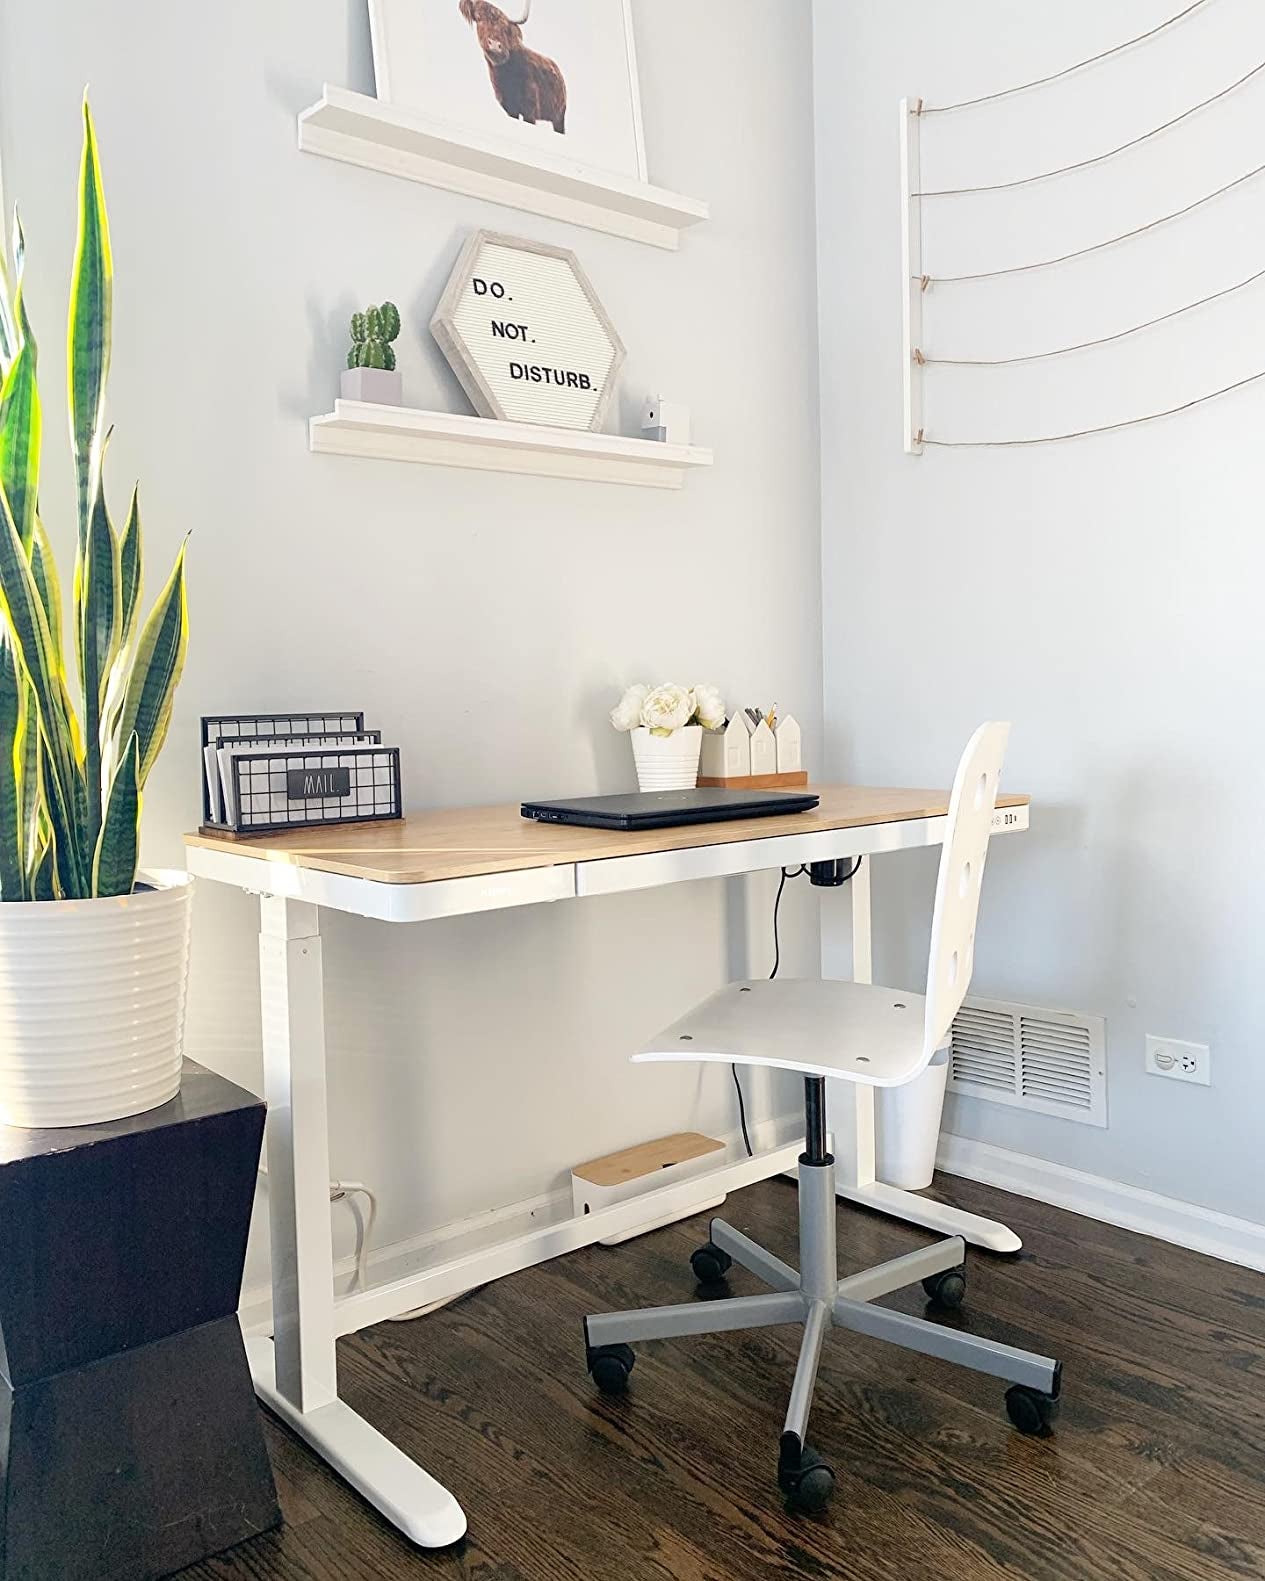 33 Things To Make Your Office Fun and Inspiring Again